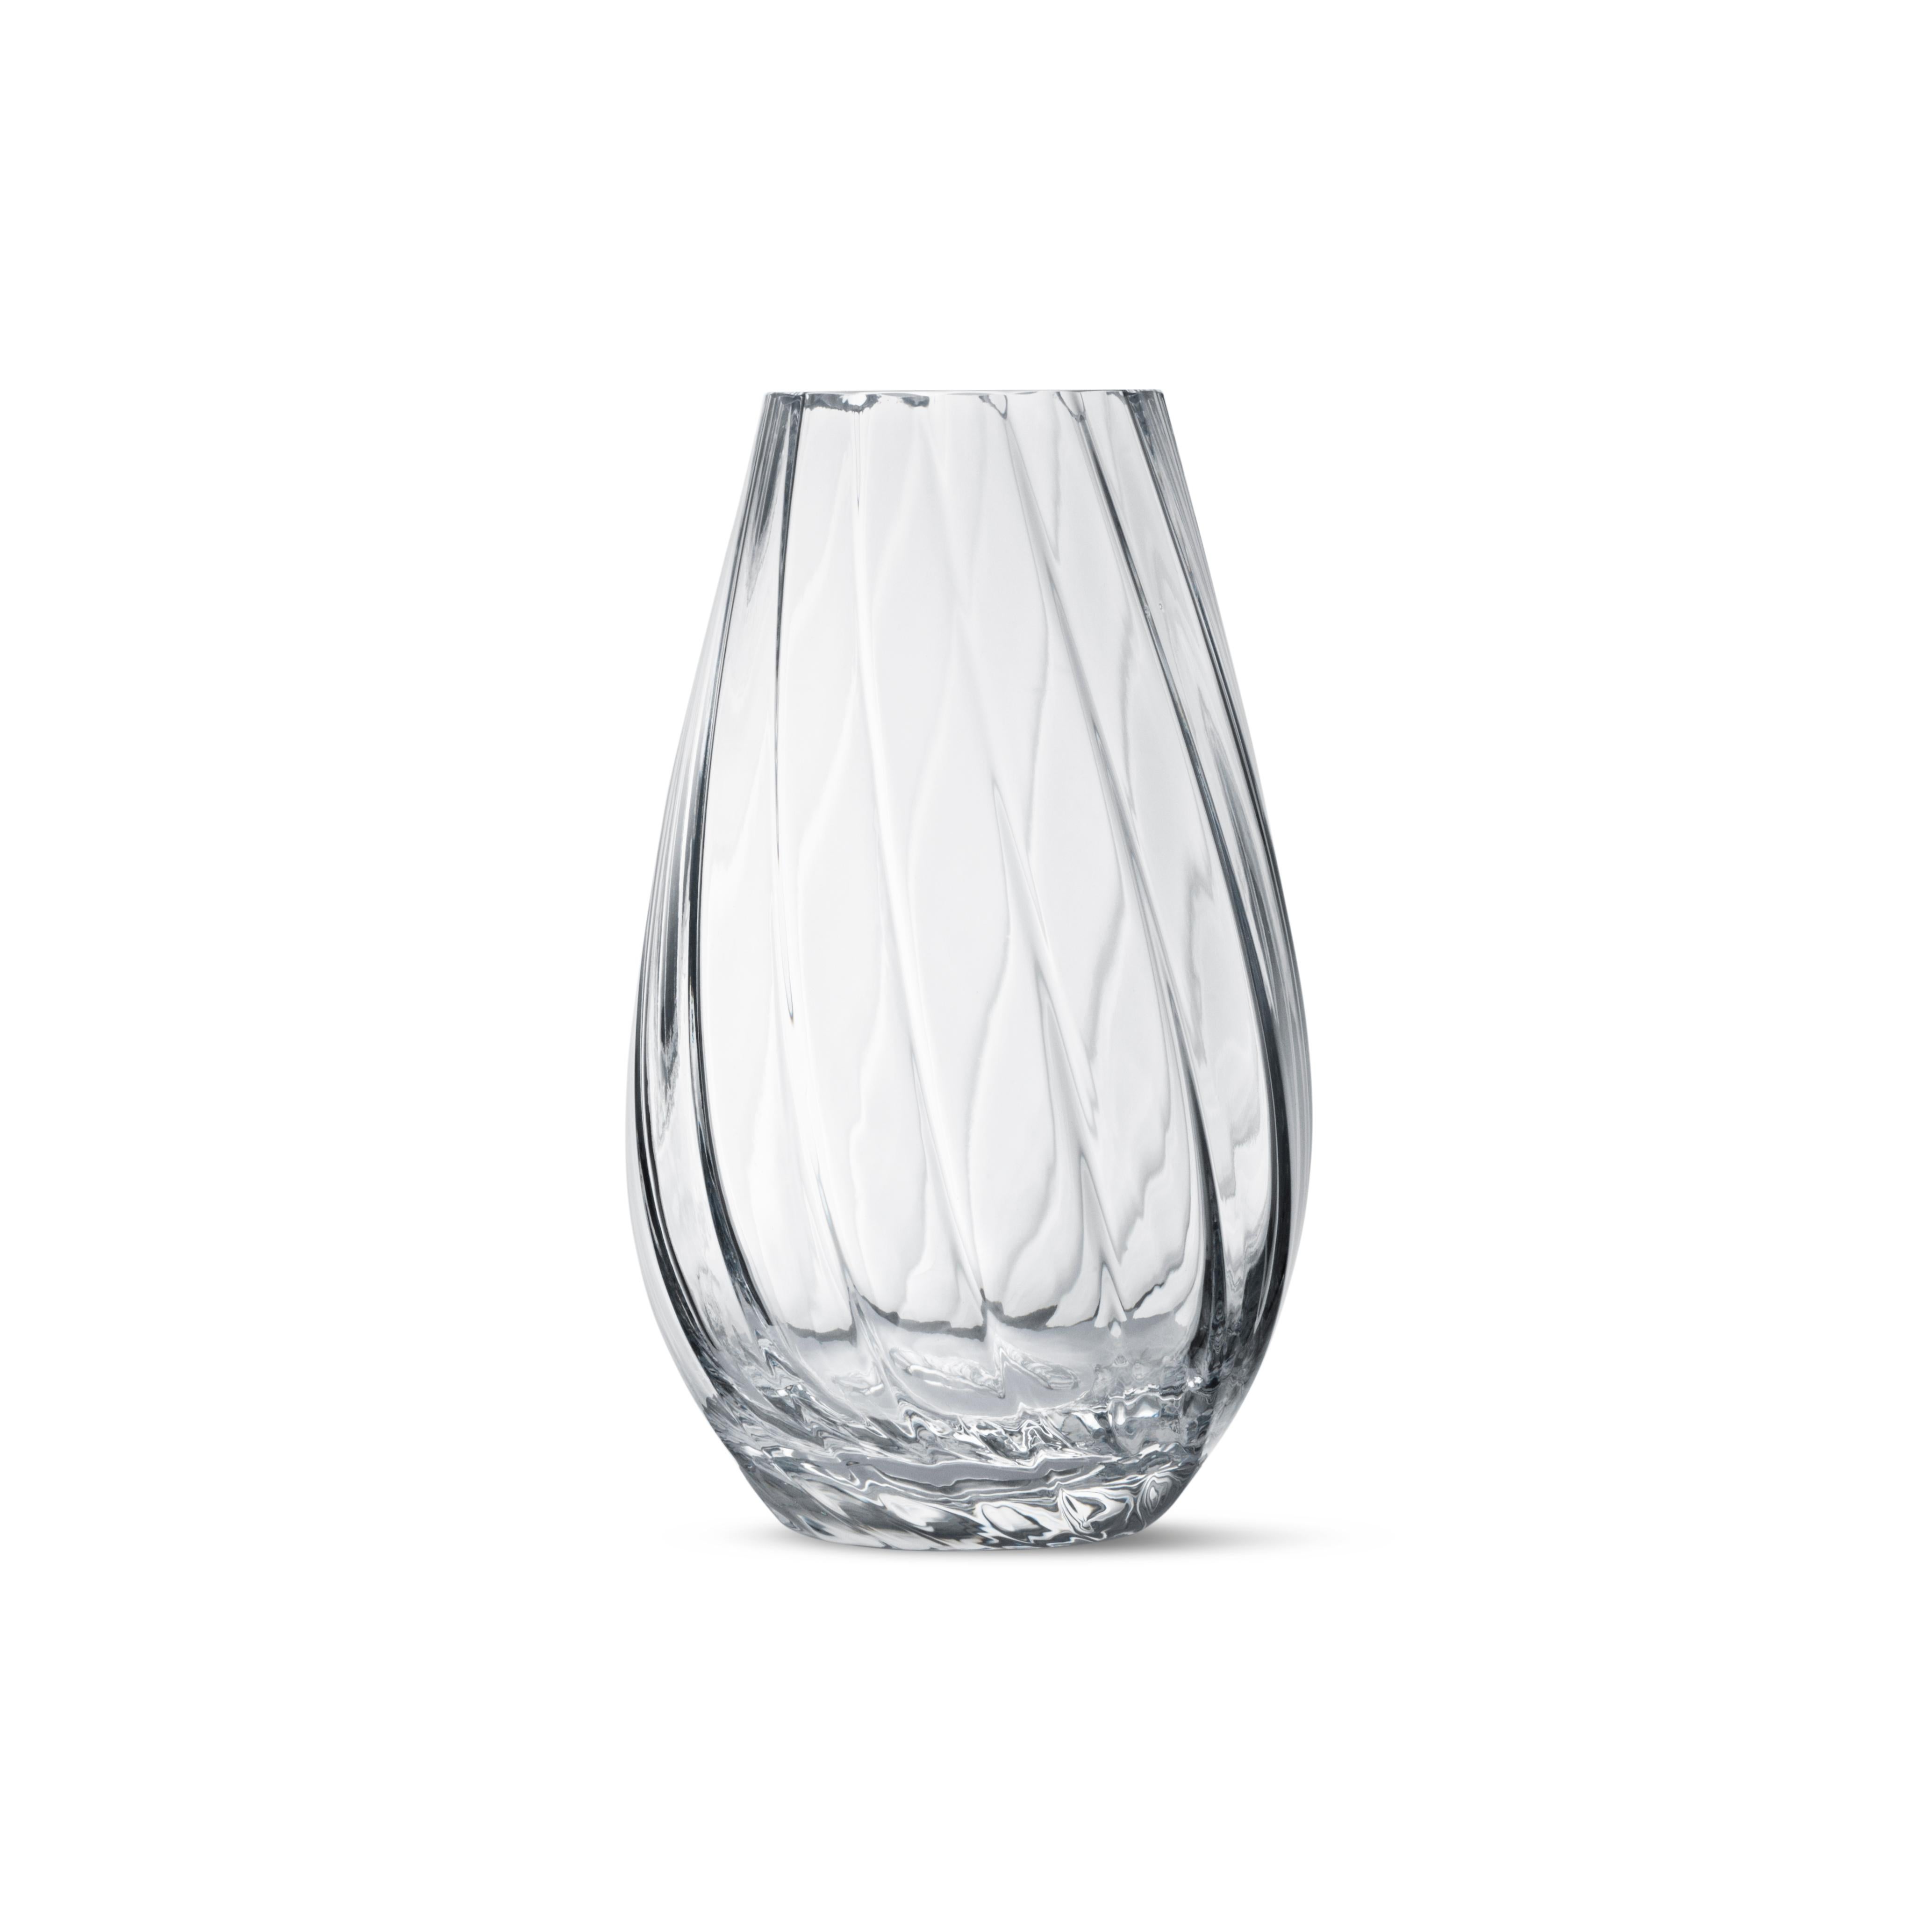 With a narrow mouth and wide base, the bulbous form of a Facet vase is perfect for displaying full bouquets. The vase is decorated with light-reflecting facets that add dimension and character. Seemingly at odds with one another, the lines and